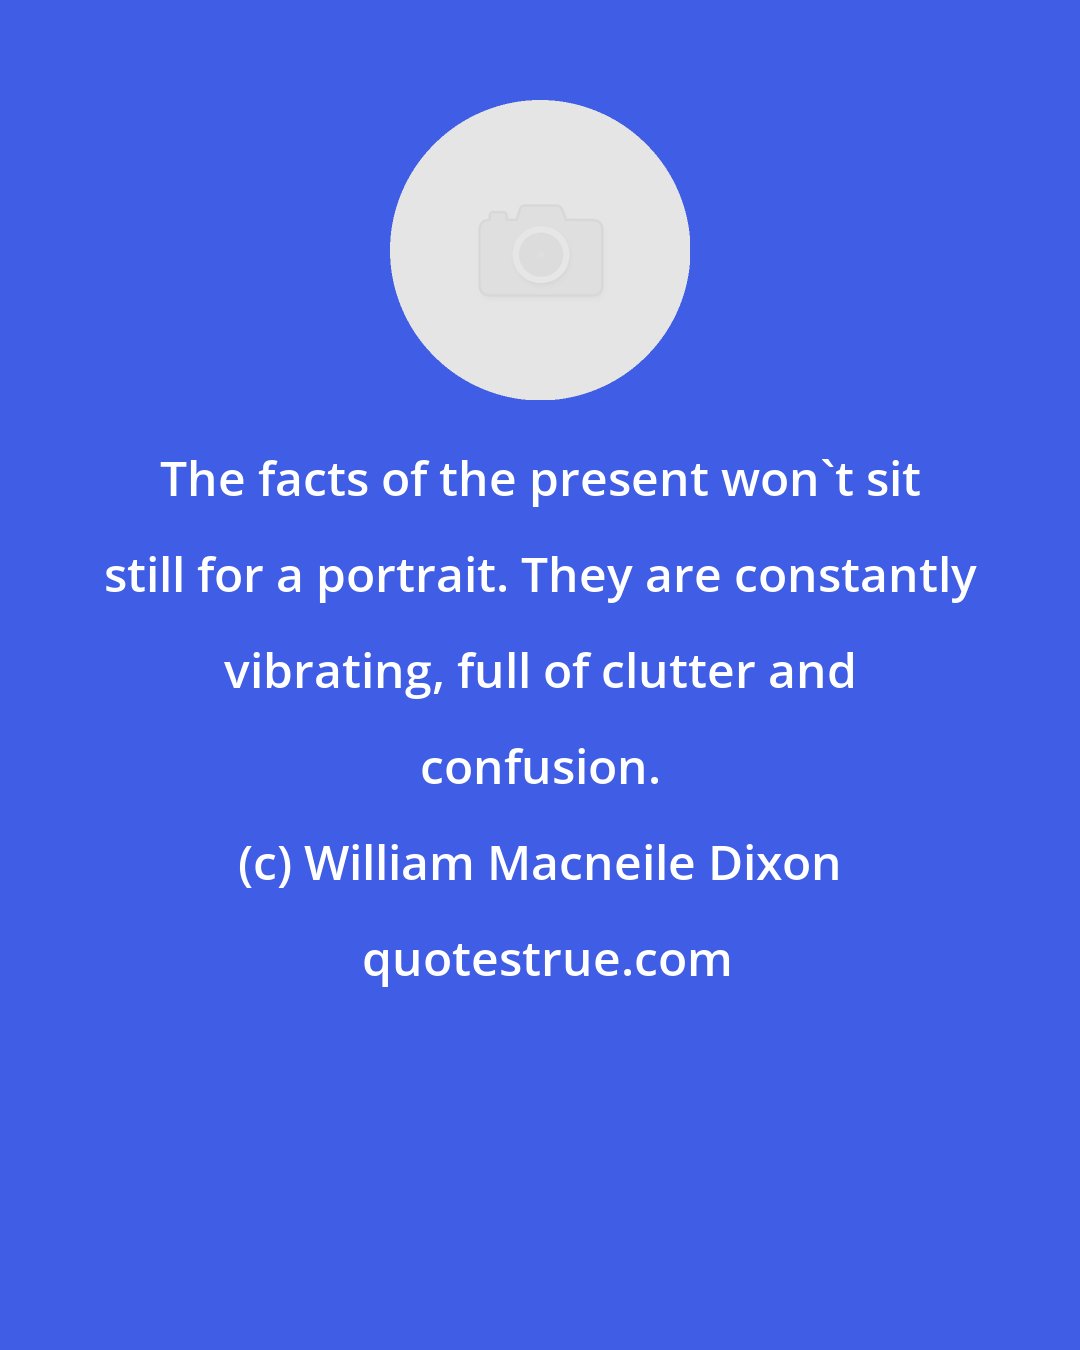 William Macneile Dixon: The facts of the present won't sit still for a portrait. They are constantly vibrating, full of clutter and confusion.